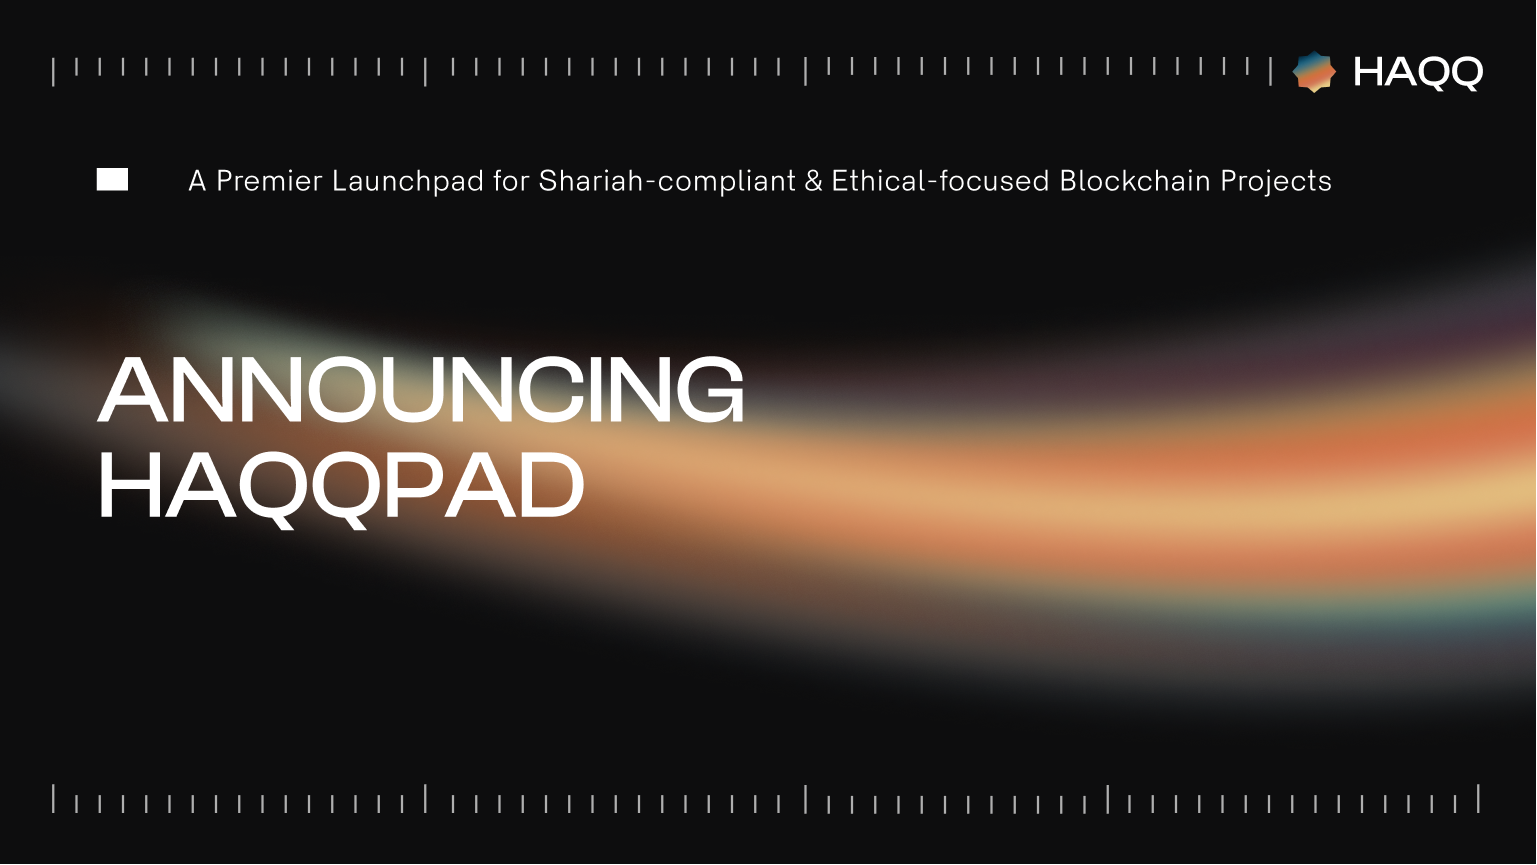 Announcing HaqqPad: A Premier Launchpad for Shariah-compliant & Ethical-focused Blockchain Projects